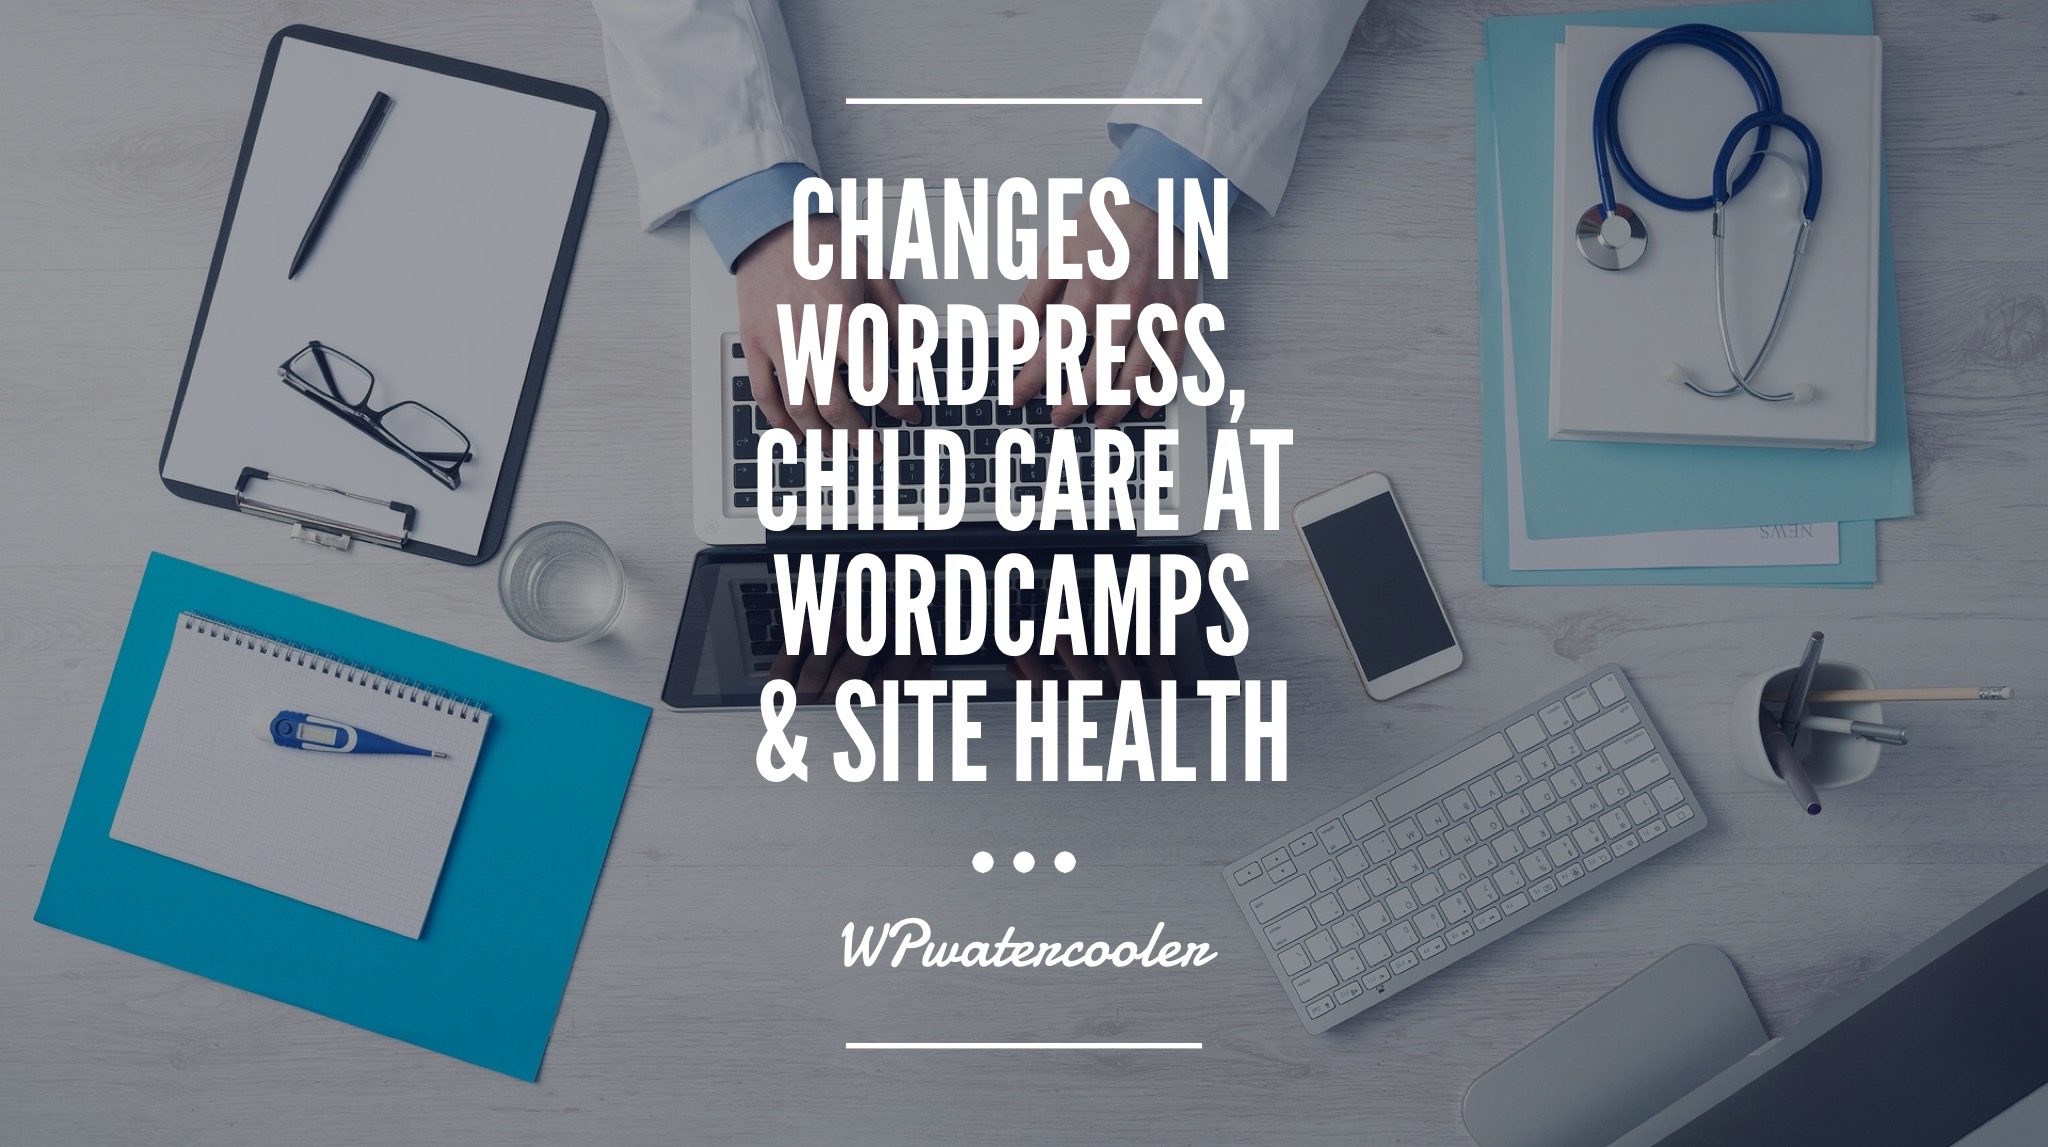 EP310 - Changes in WordPress, child care at WordCamps & site health